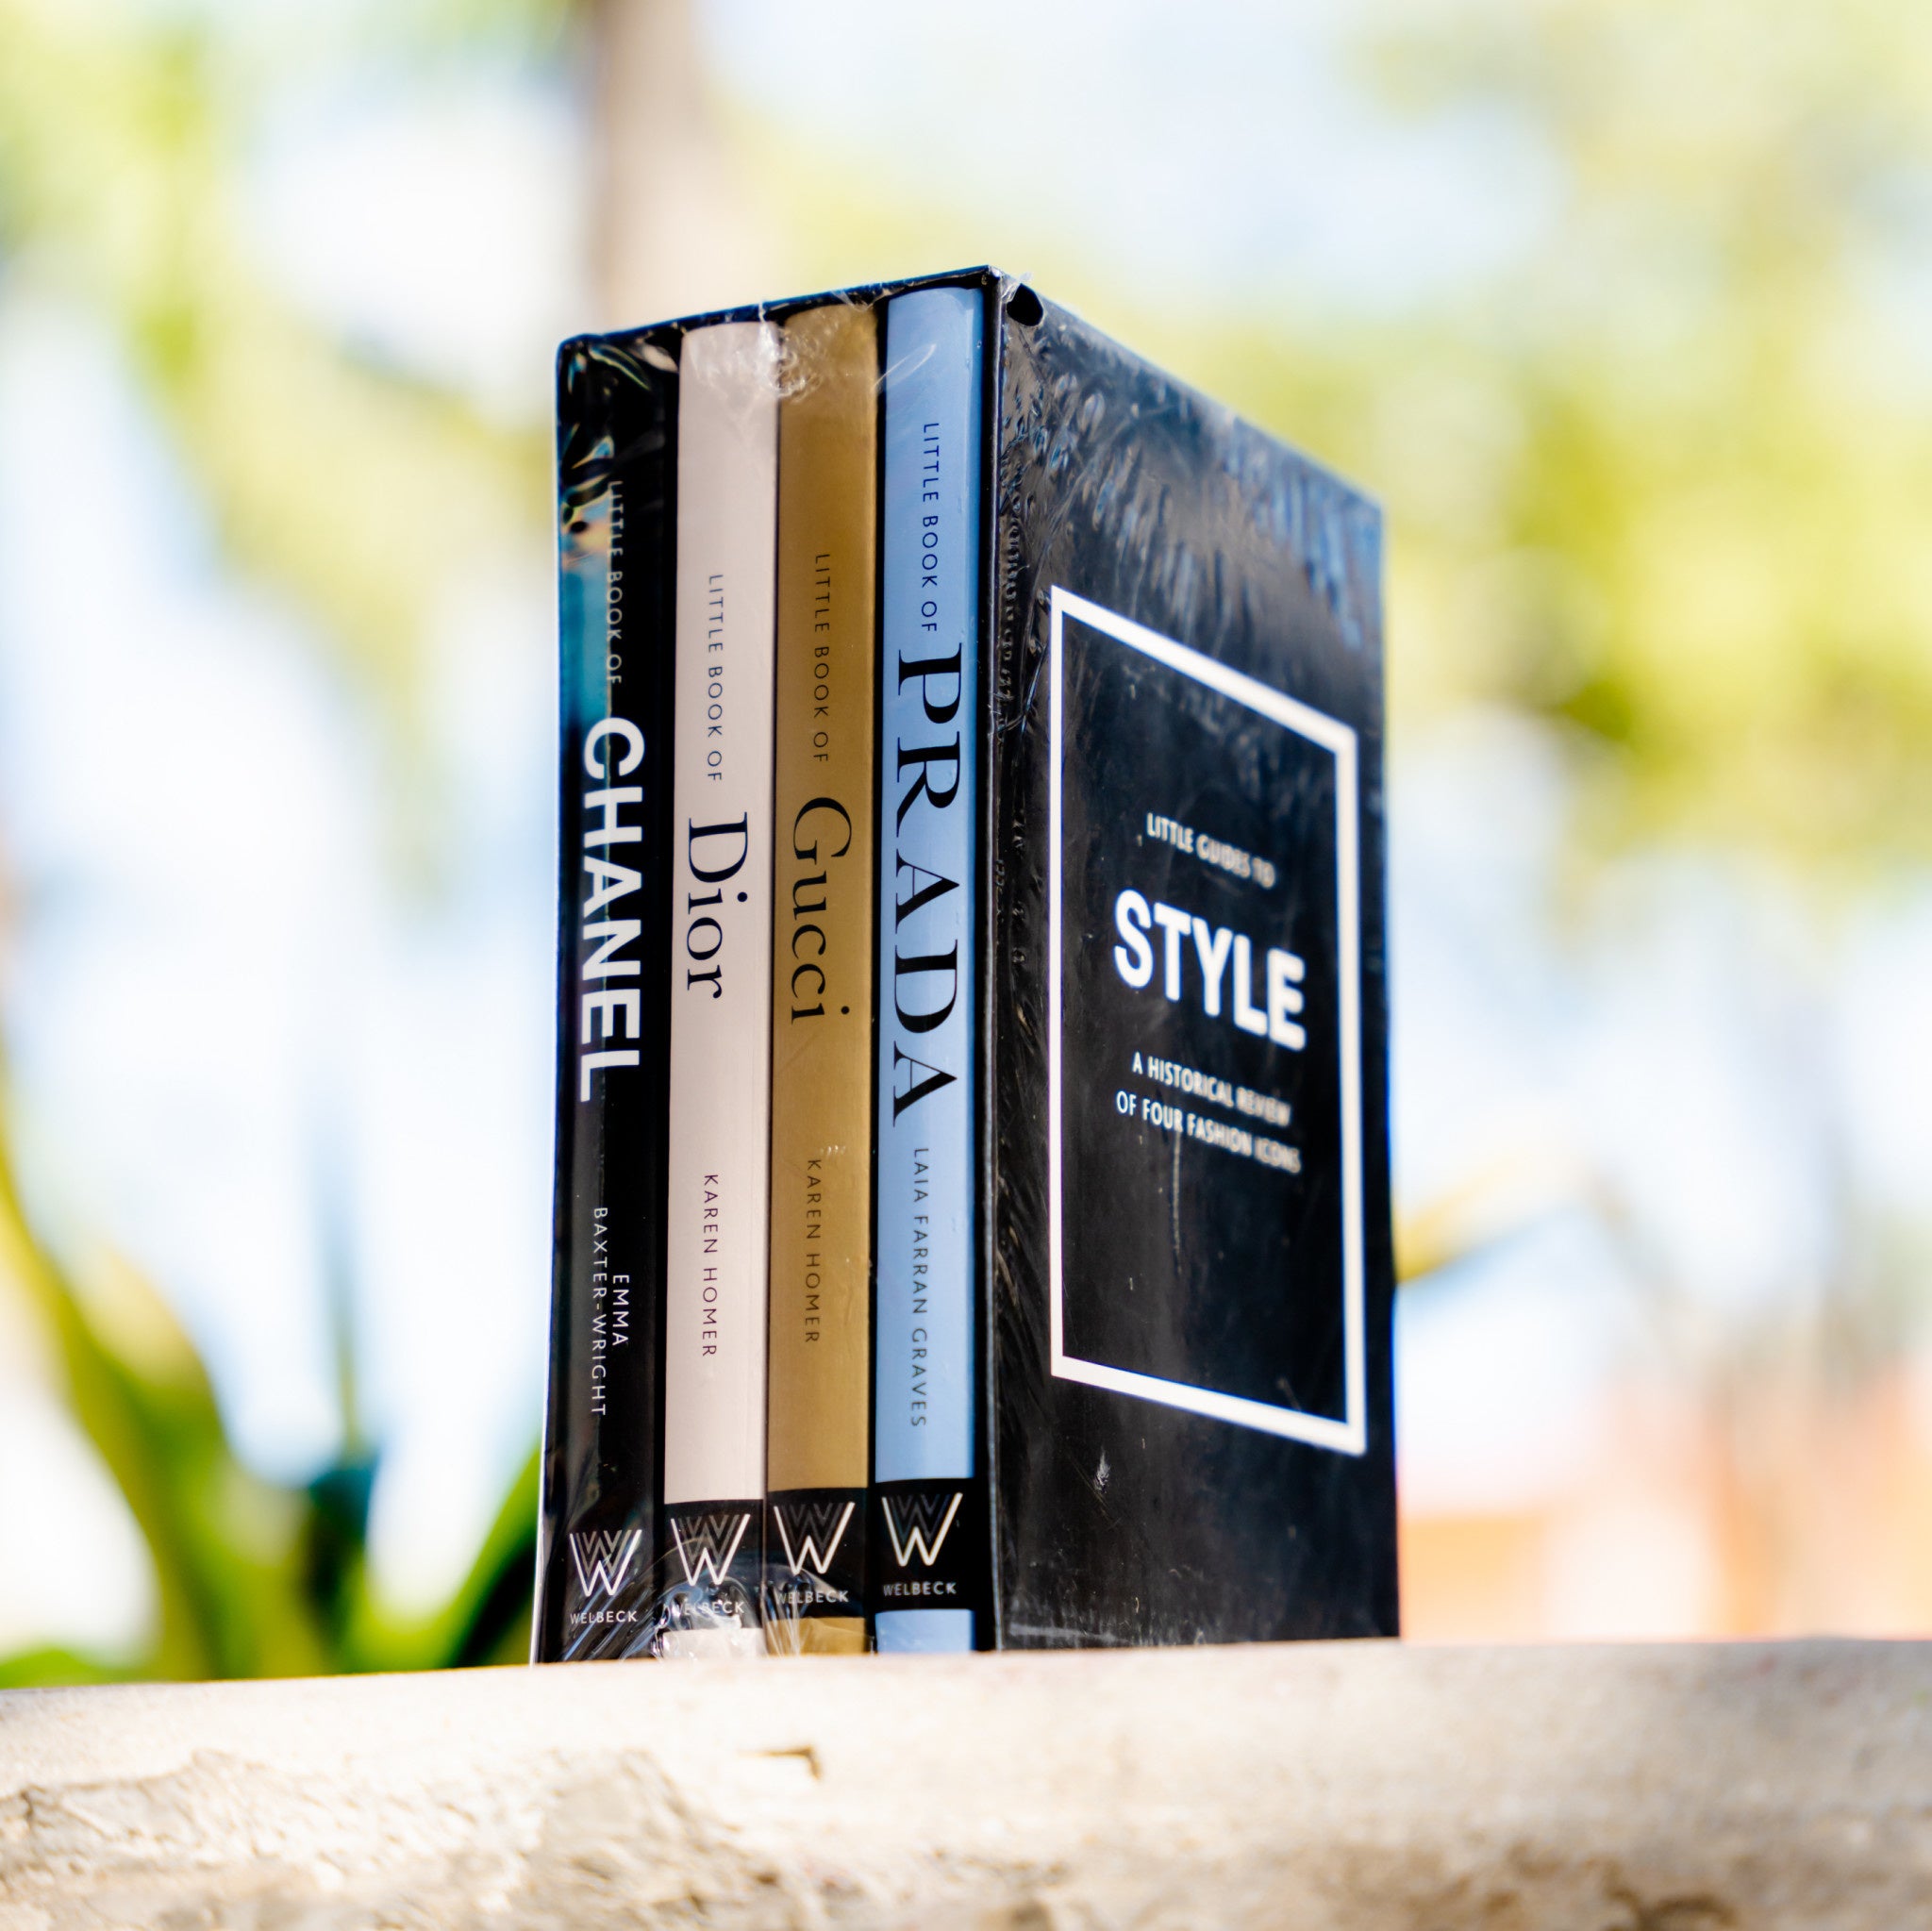 Little Guides to Style: The Story of Four Iconic Fashion Houses - Wynwood Walls Shop